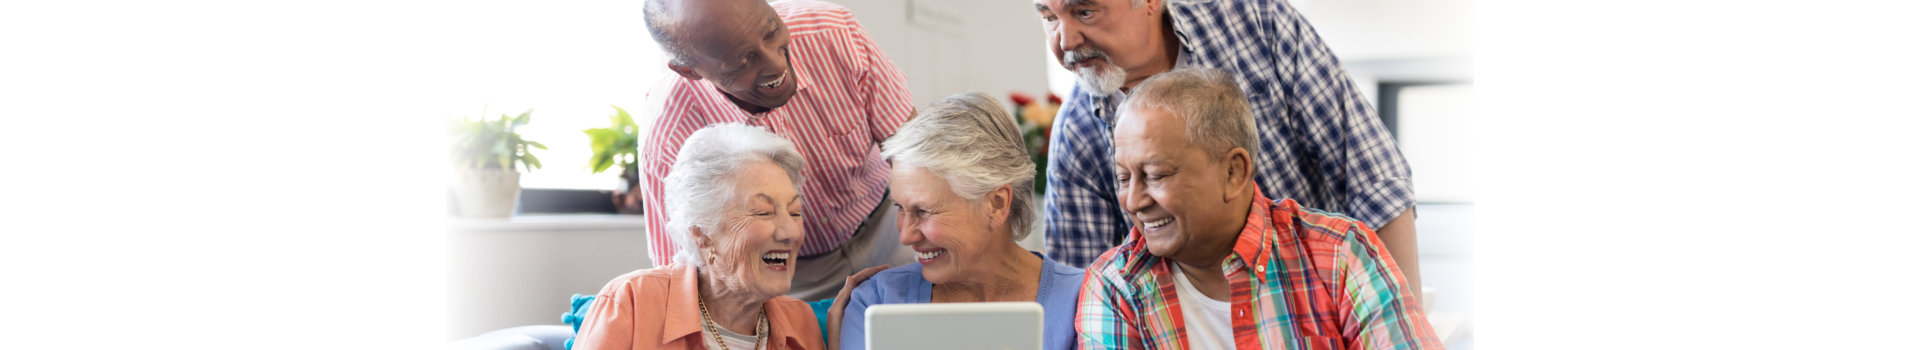 Senior woman showing digital tablet to cheerful friends